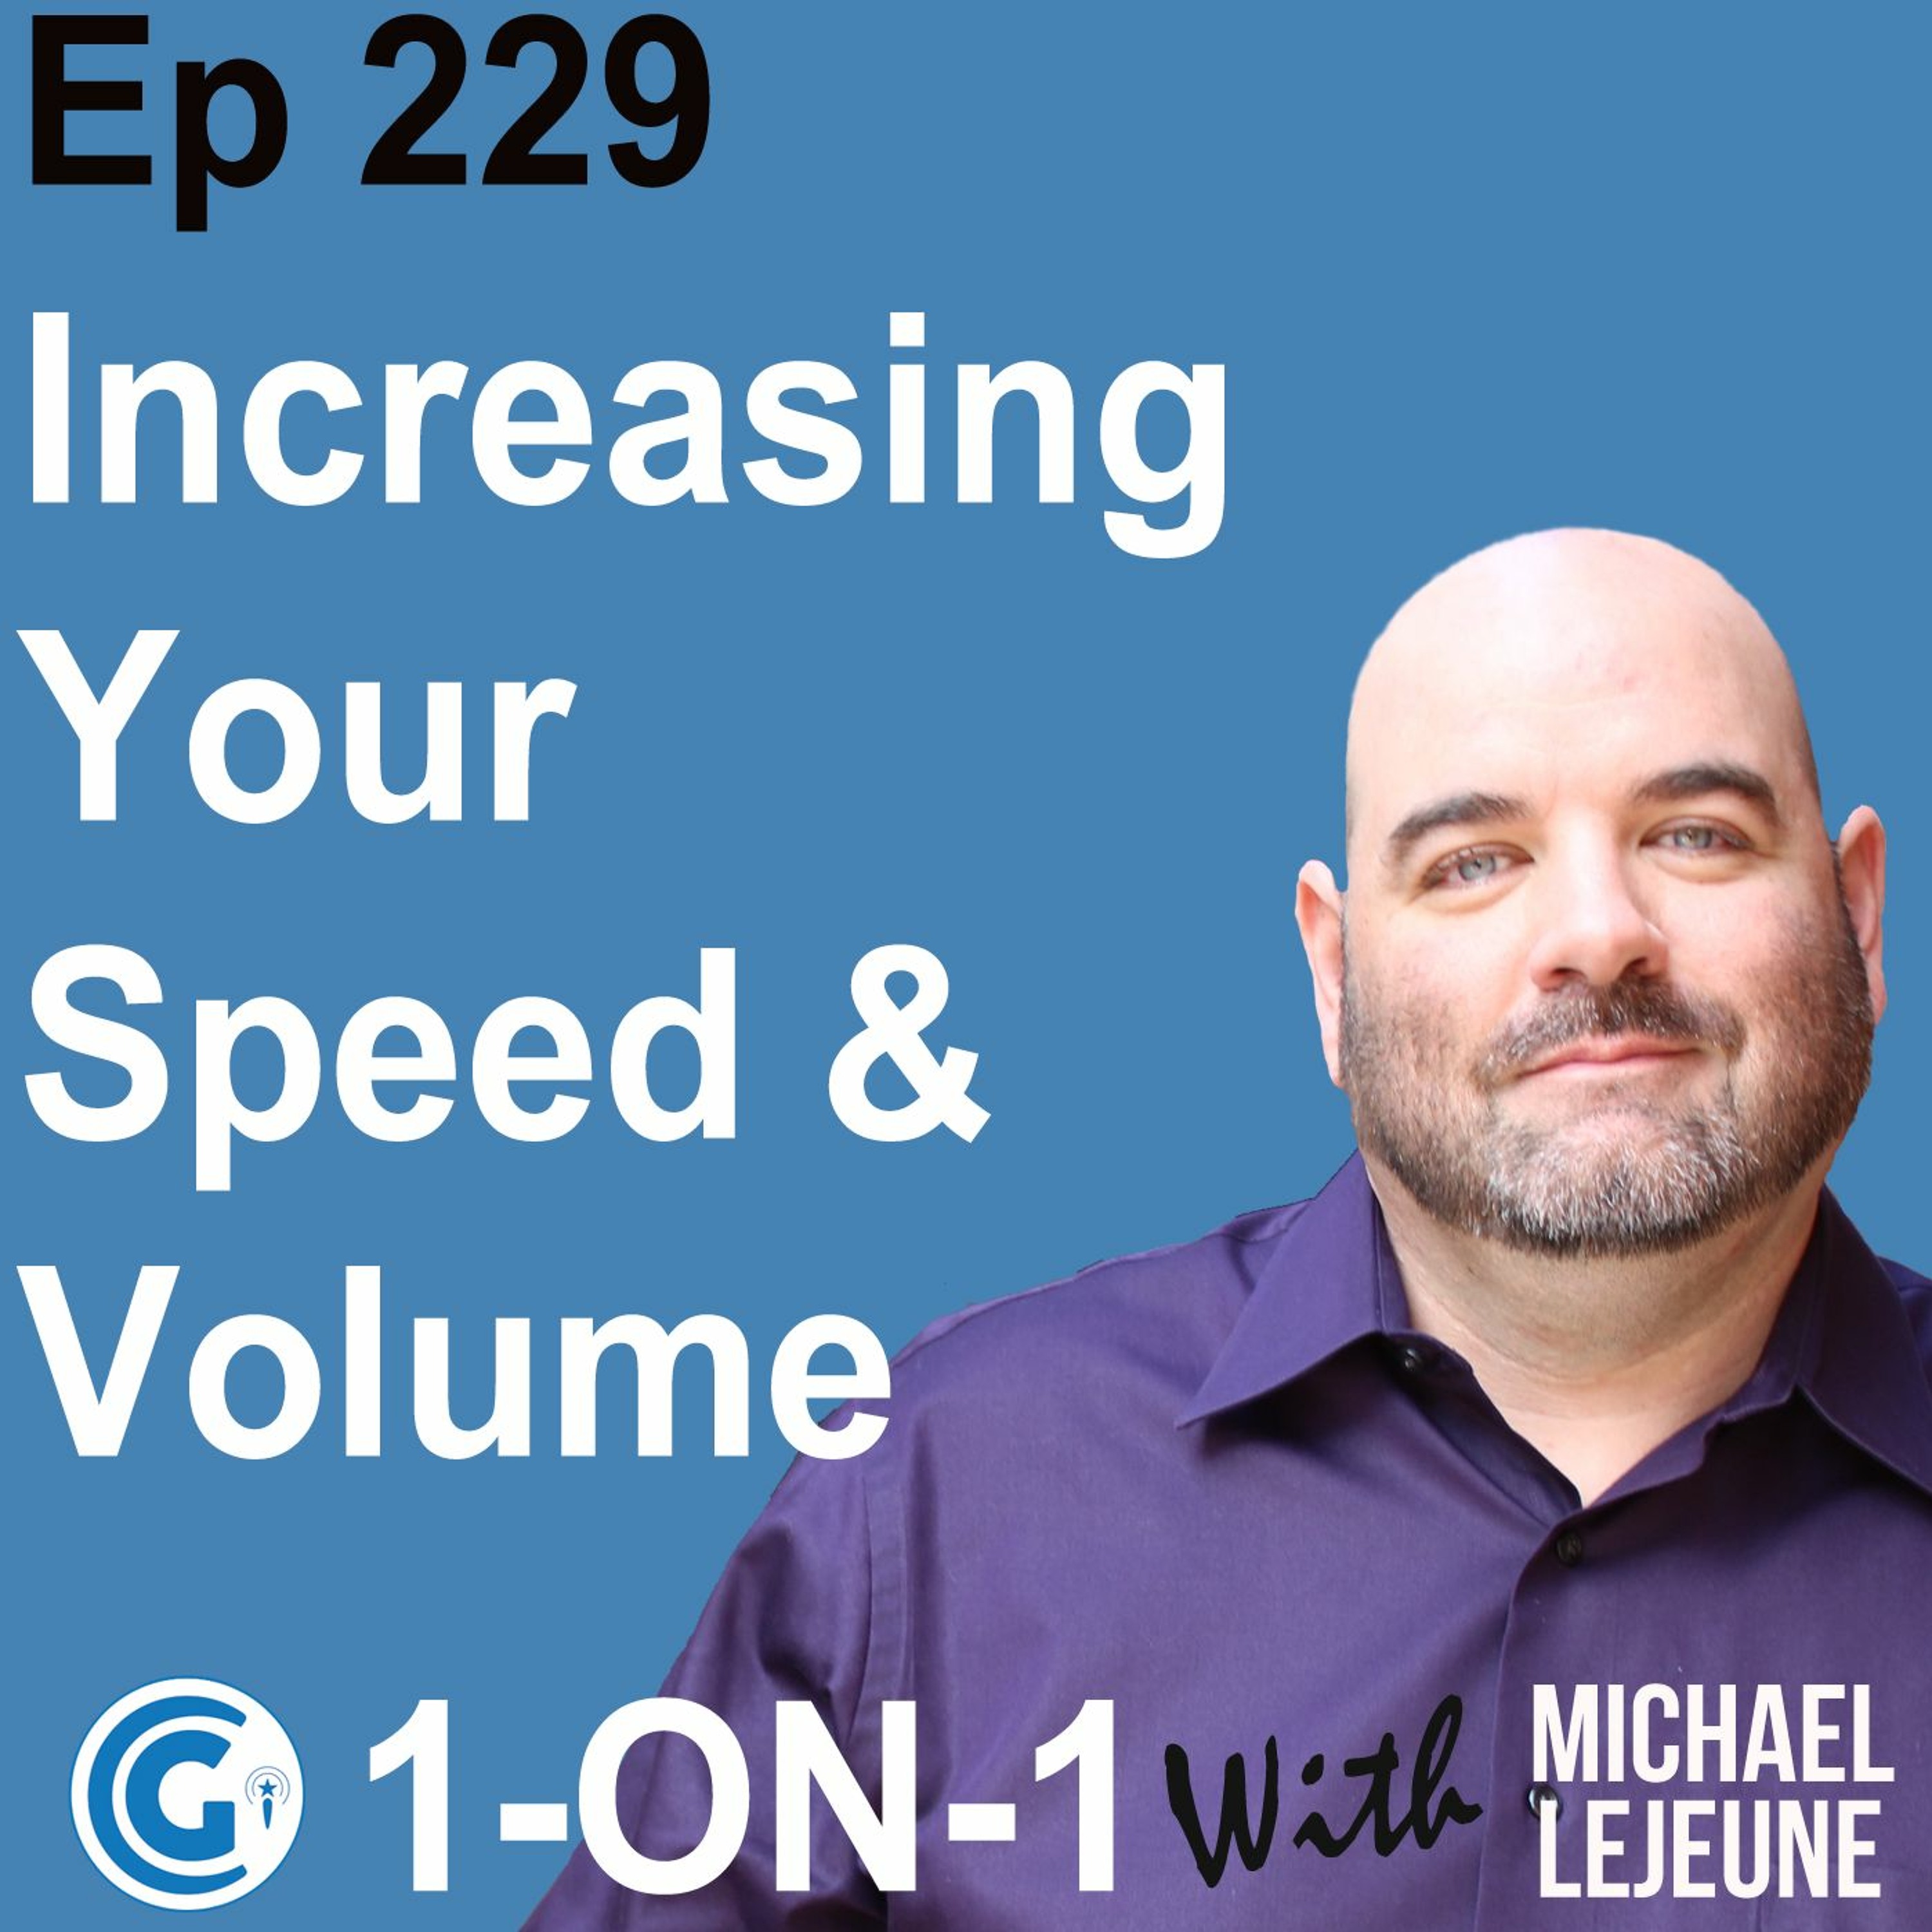 Ep 229 - Increasing Your Speed and Volume